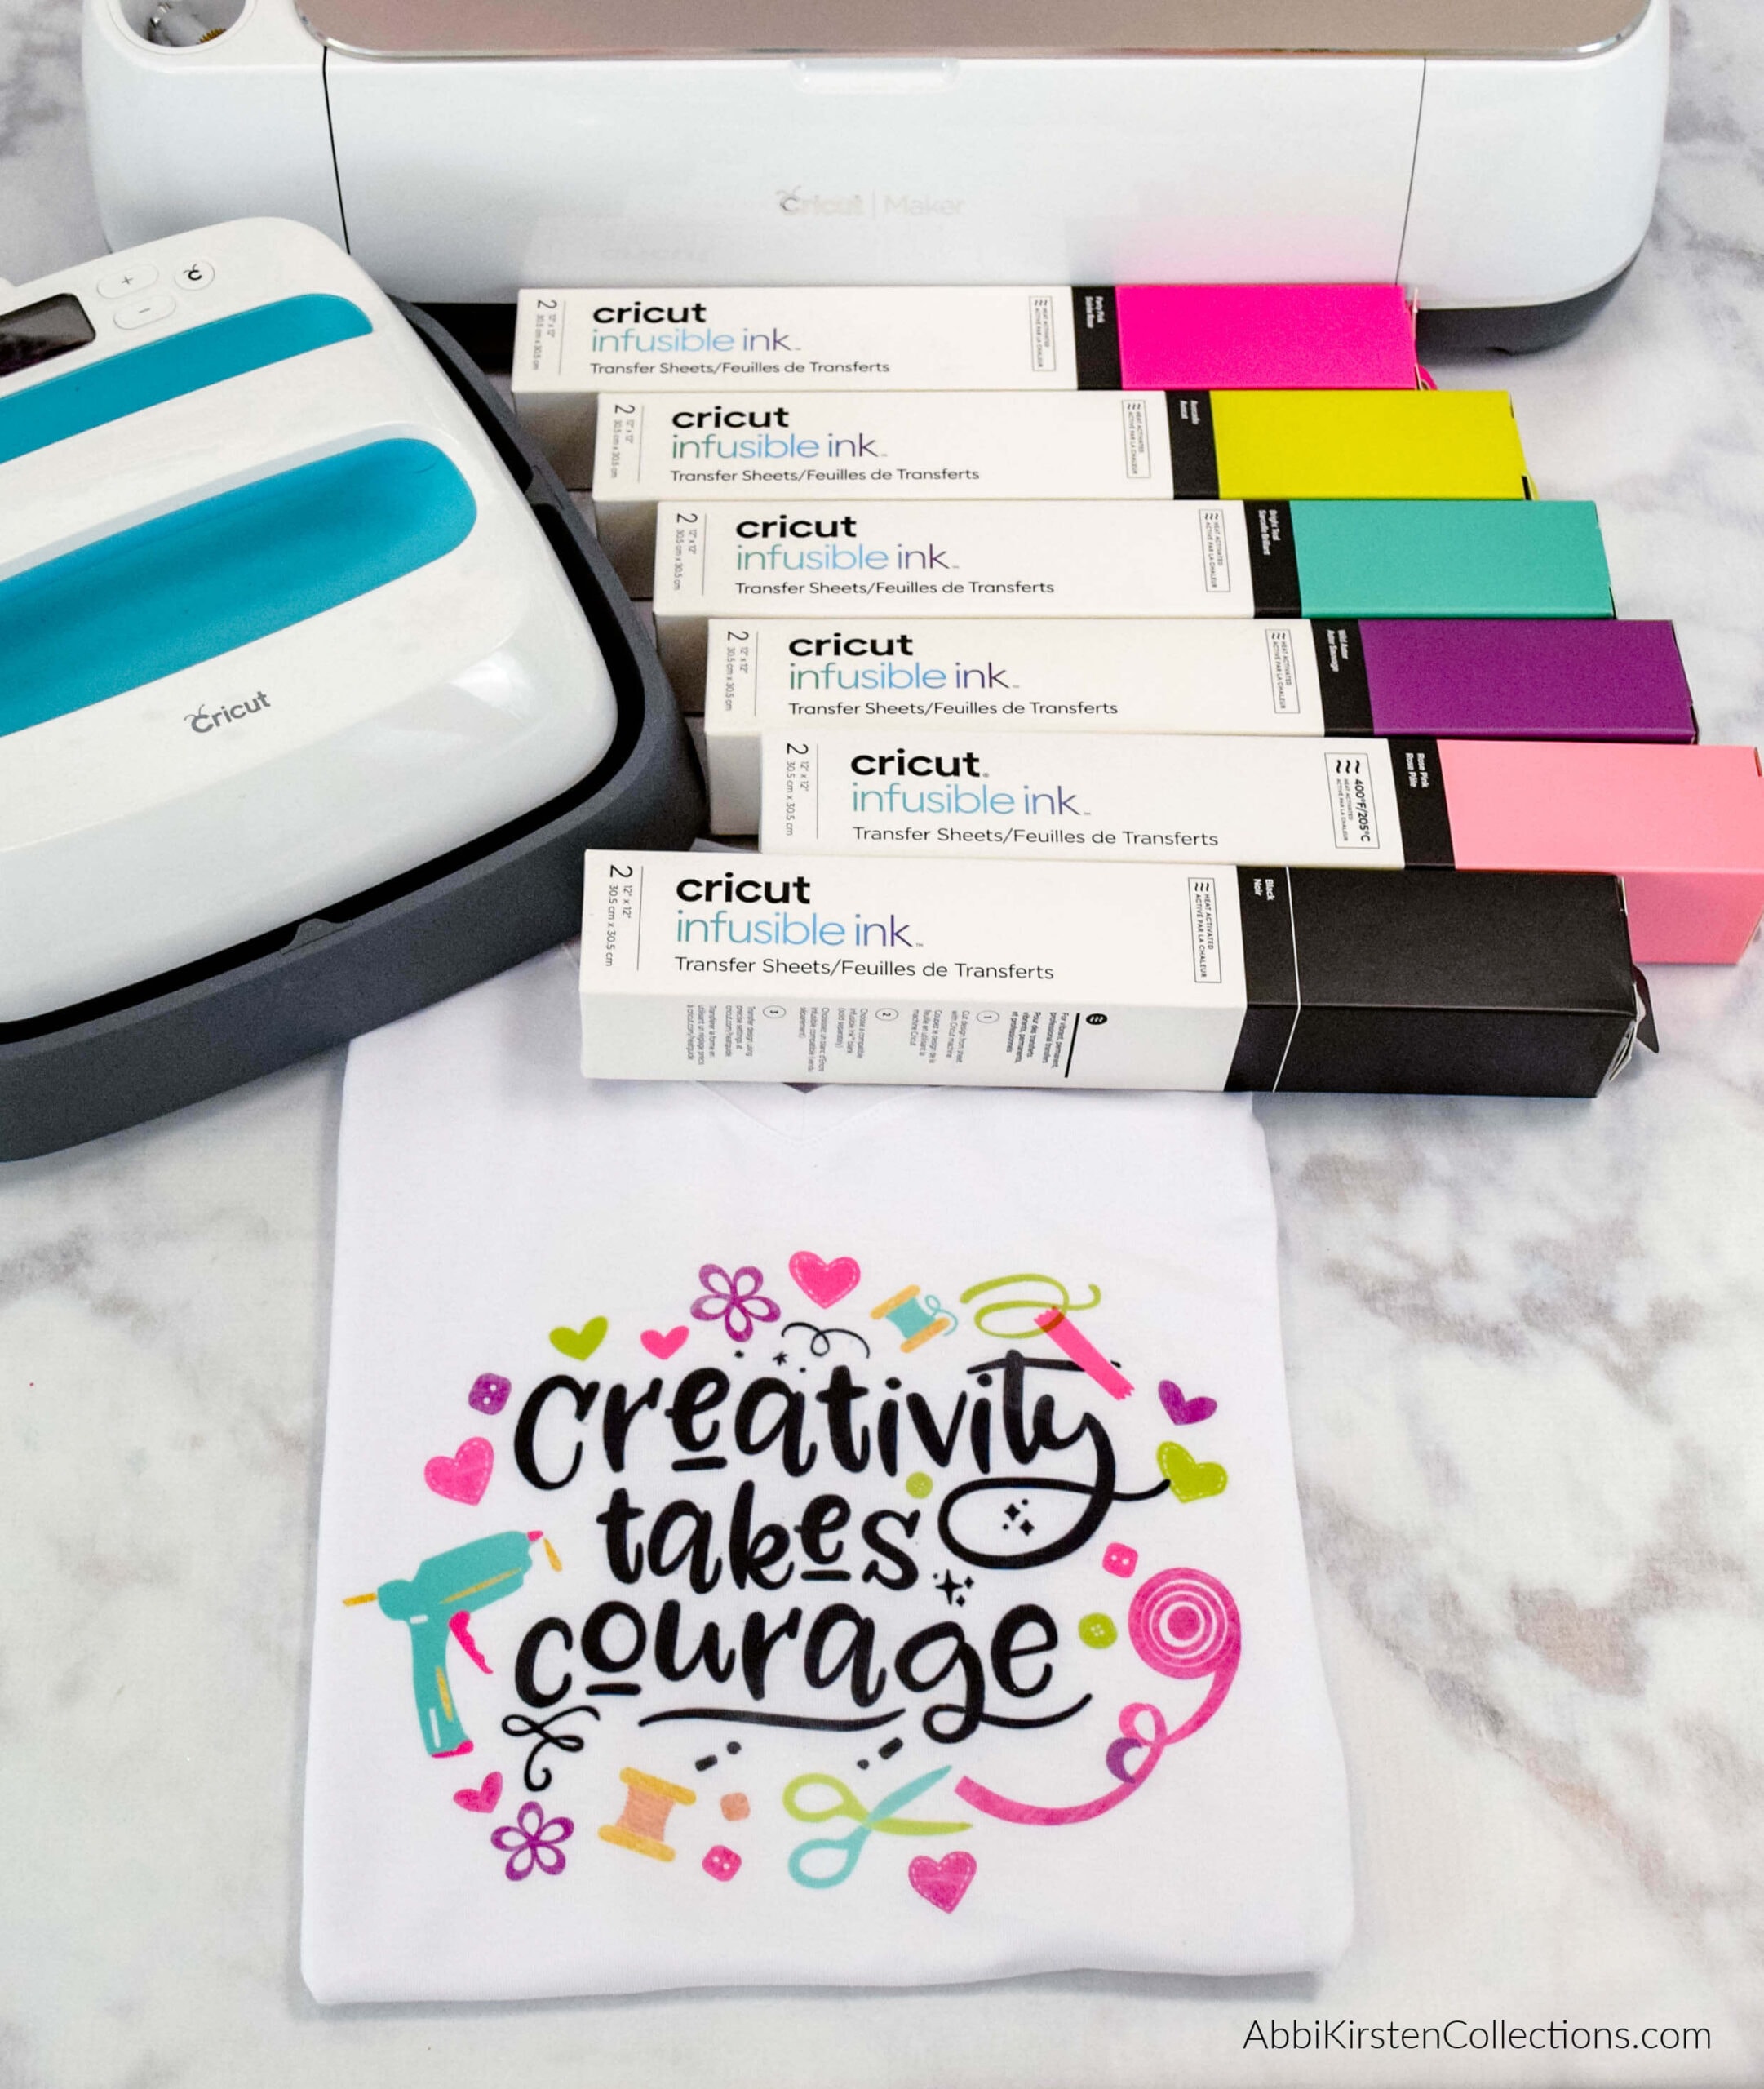 Infusible Ink vs. Sublimation Ink : Everything You Need To Know